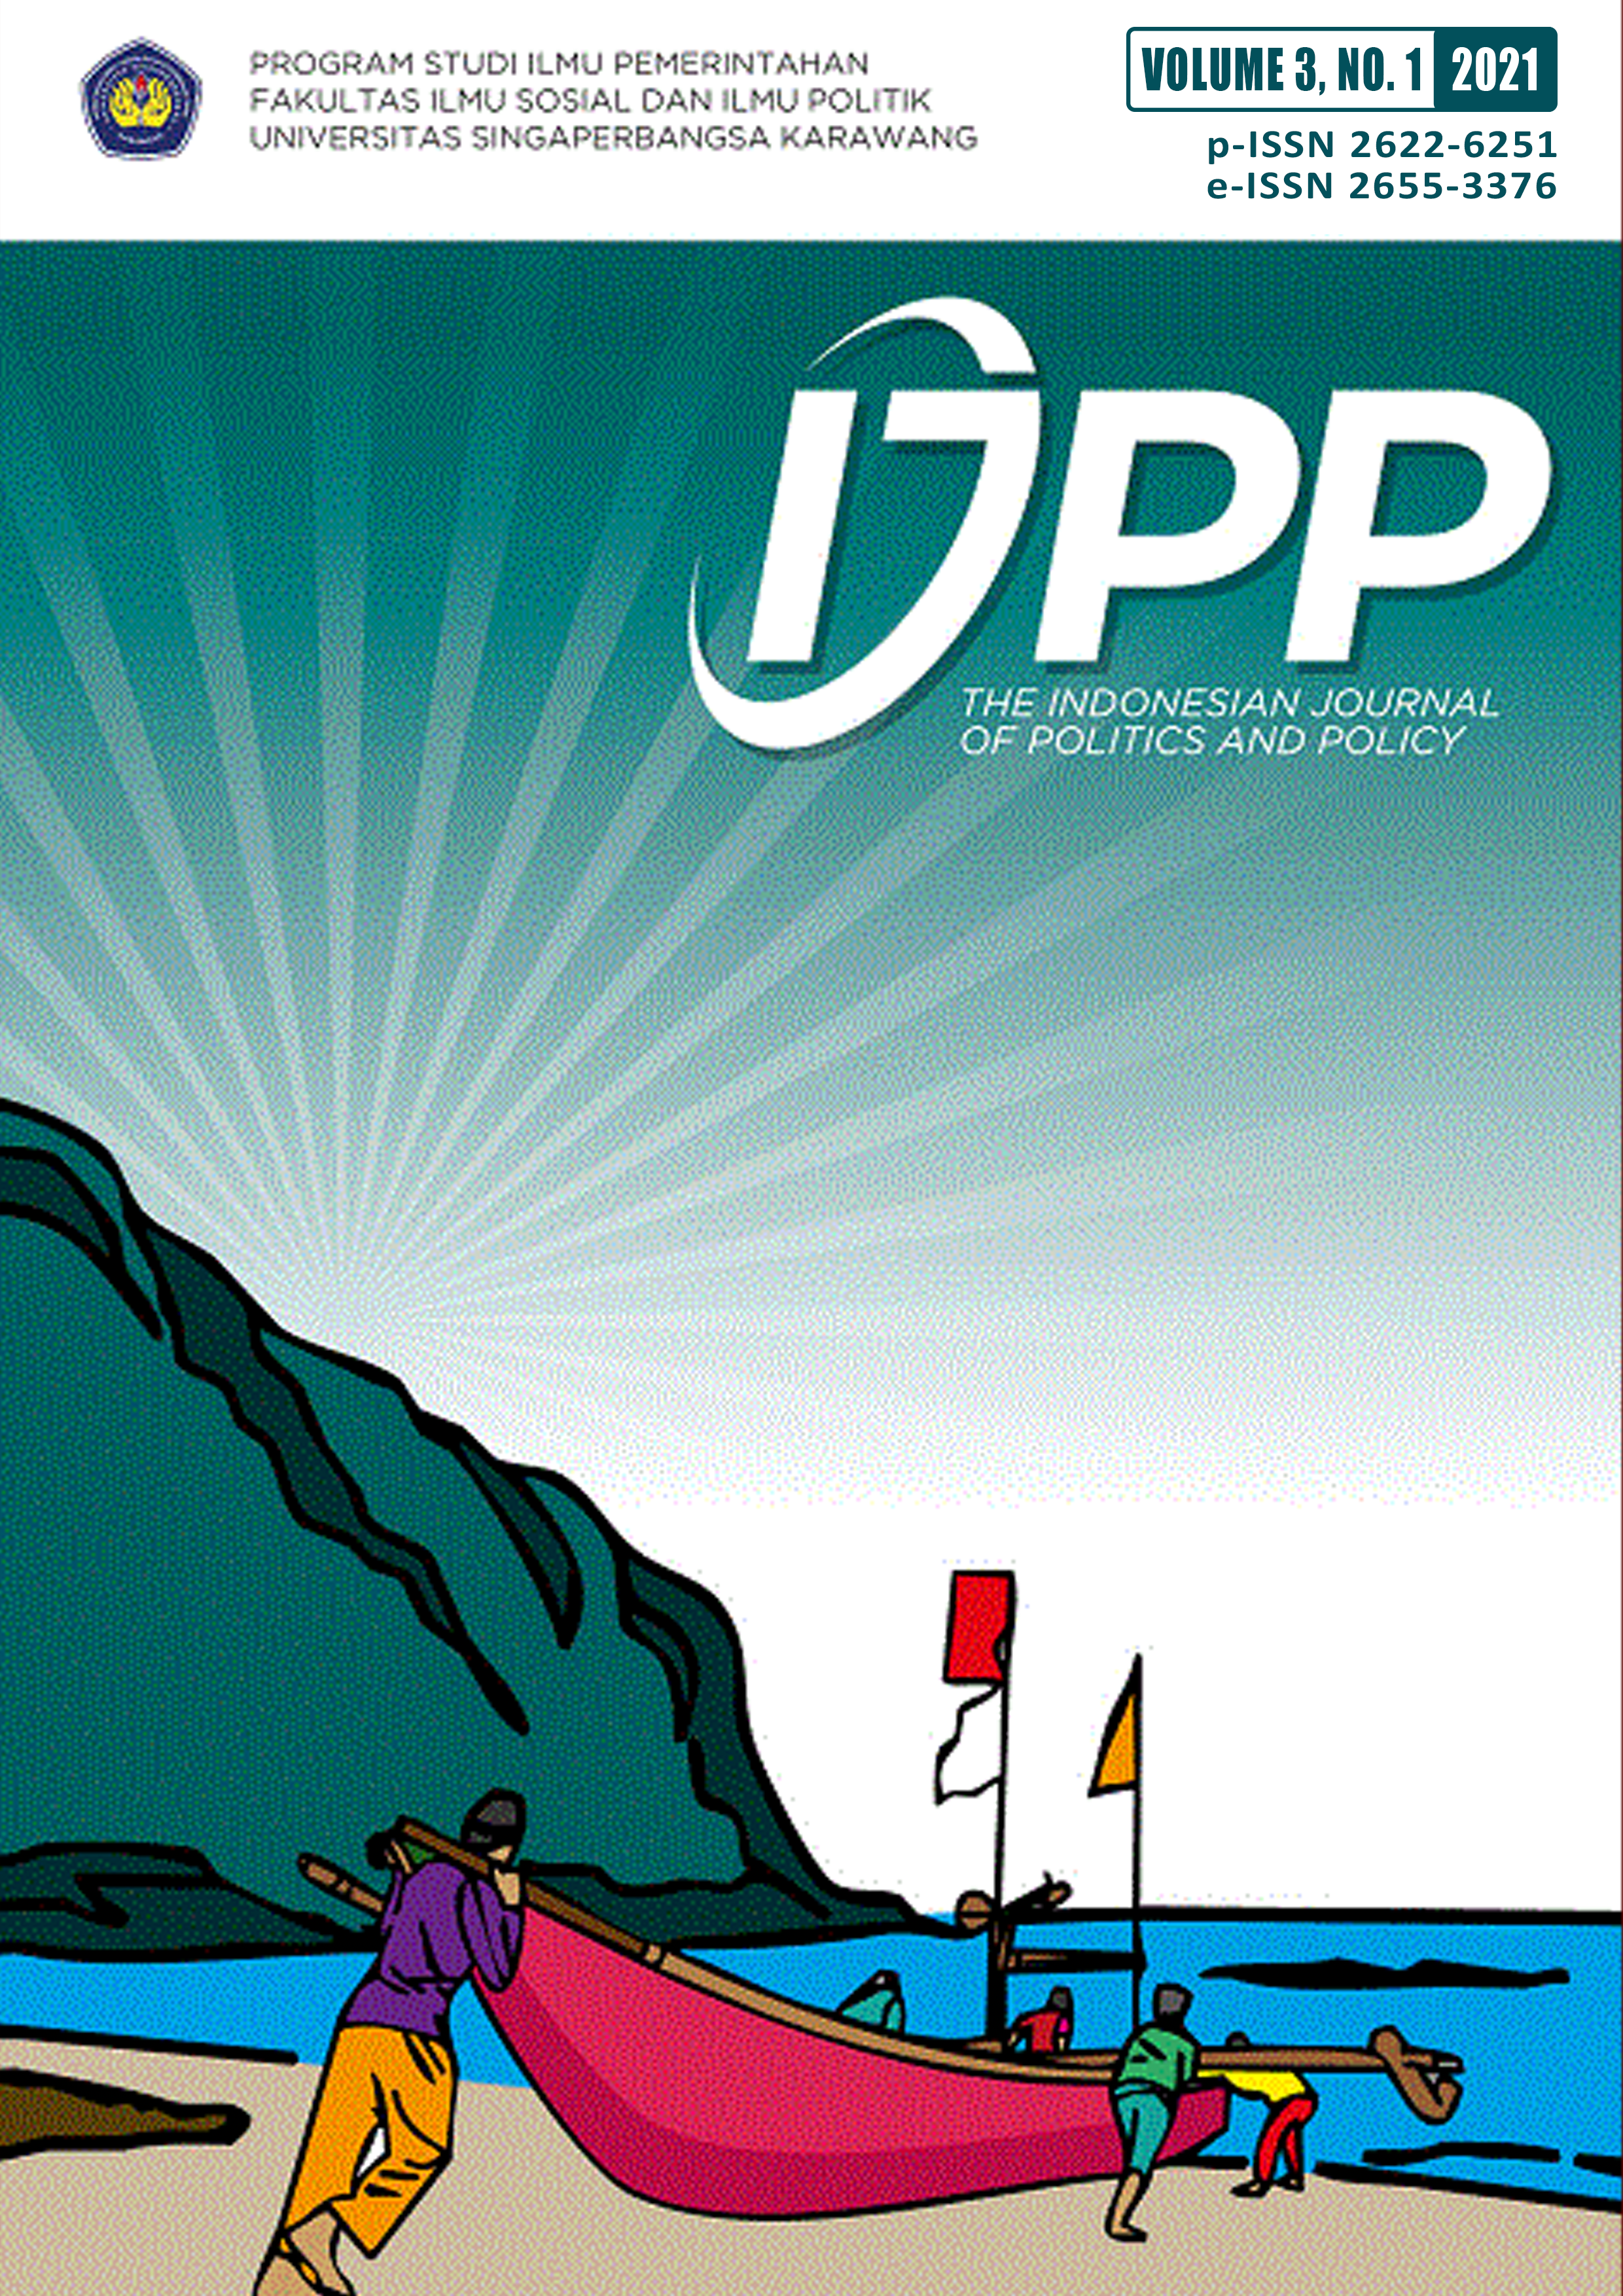 					Lihat Vol 3 No 1 (2021): THE INDONESIAN JOURNAL OF POLITICS AND POLICY
				